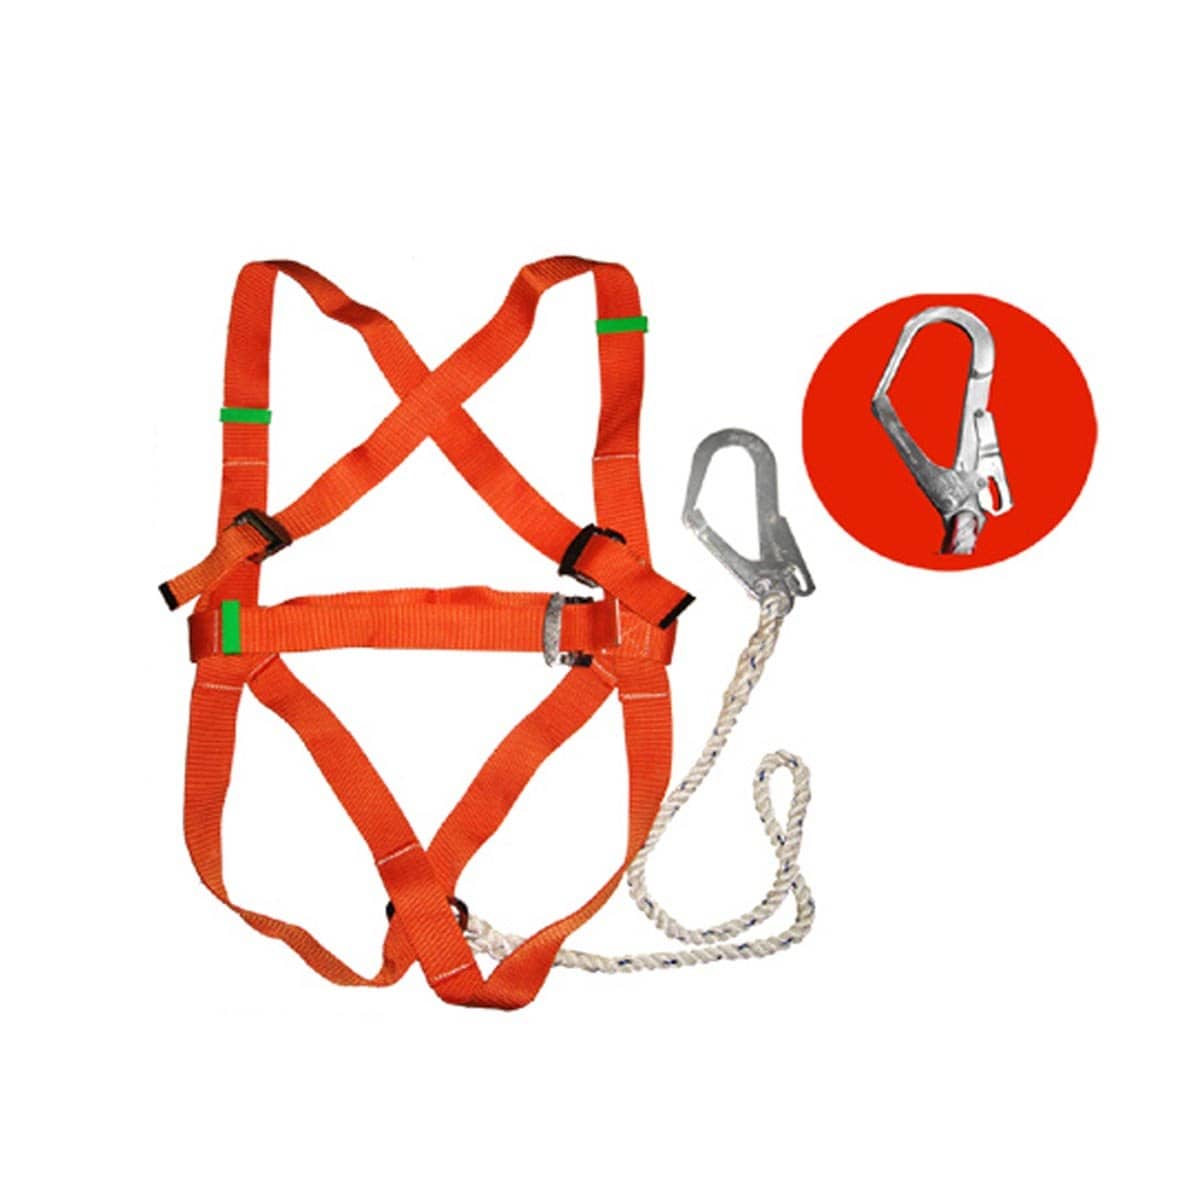 WORKER Full Body Safety Harness (Big Hook)